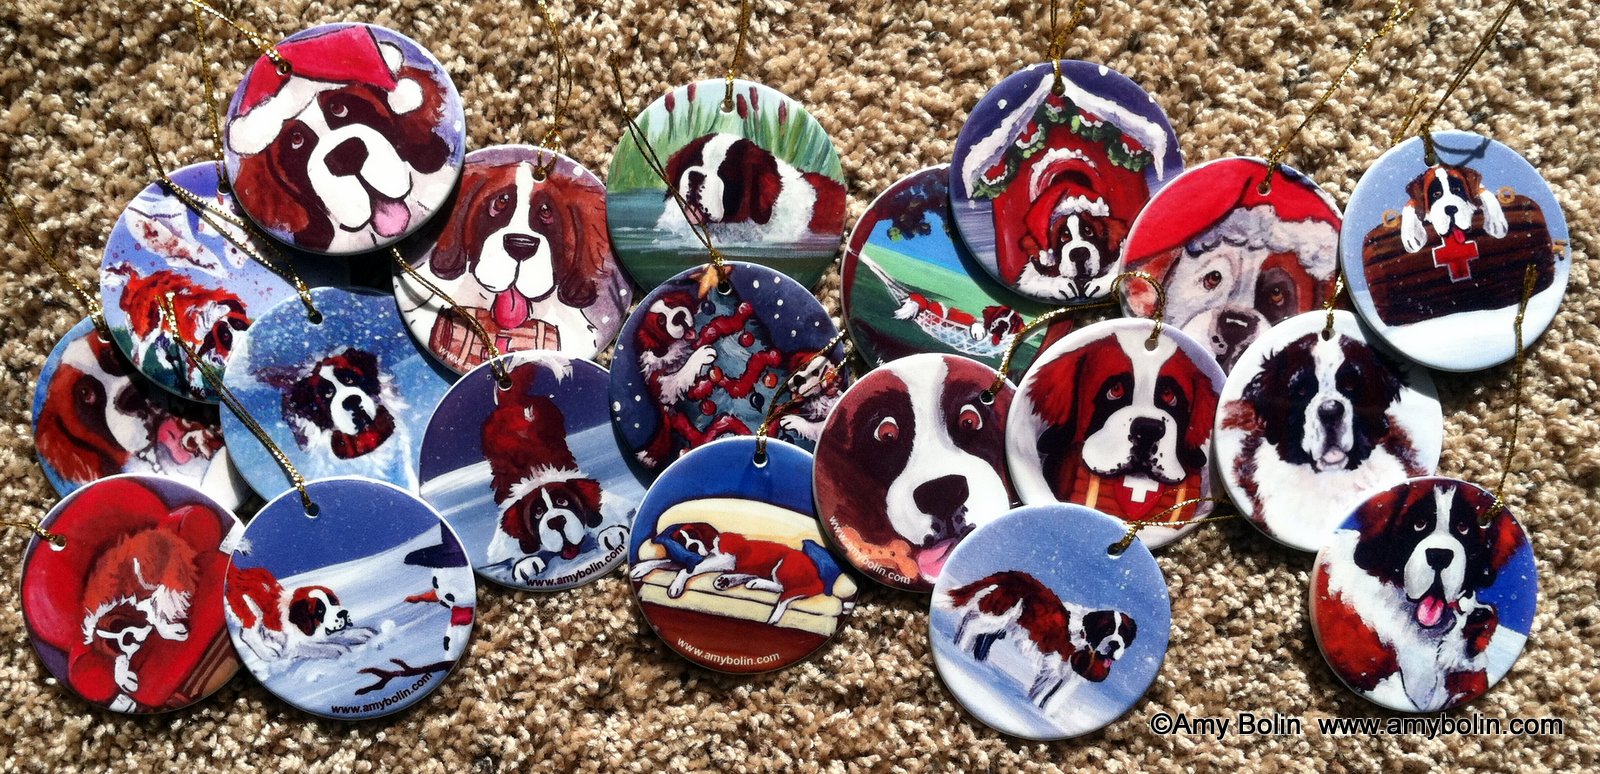 Saint Bernard Ornament Collage made with sublimation printing